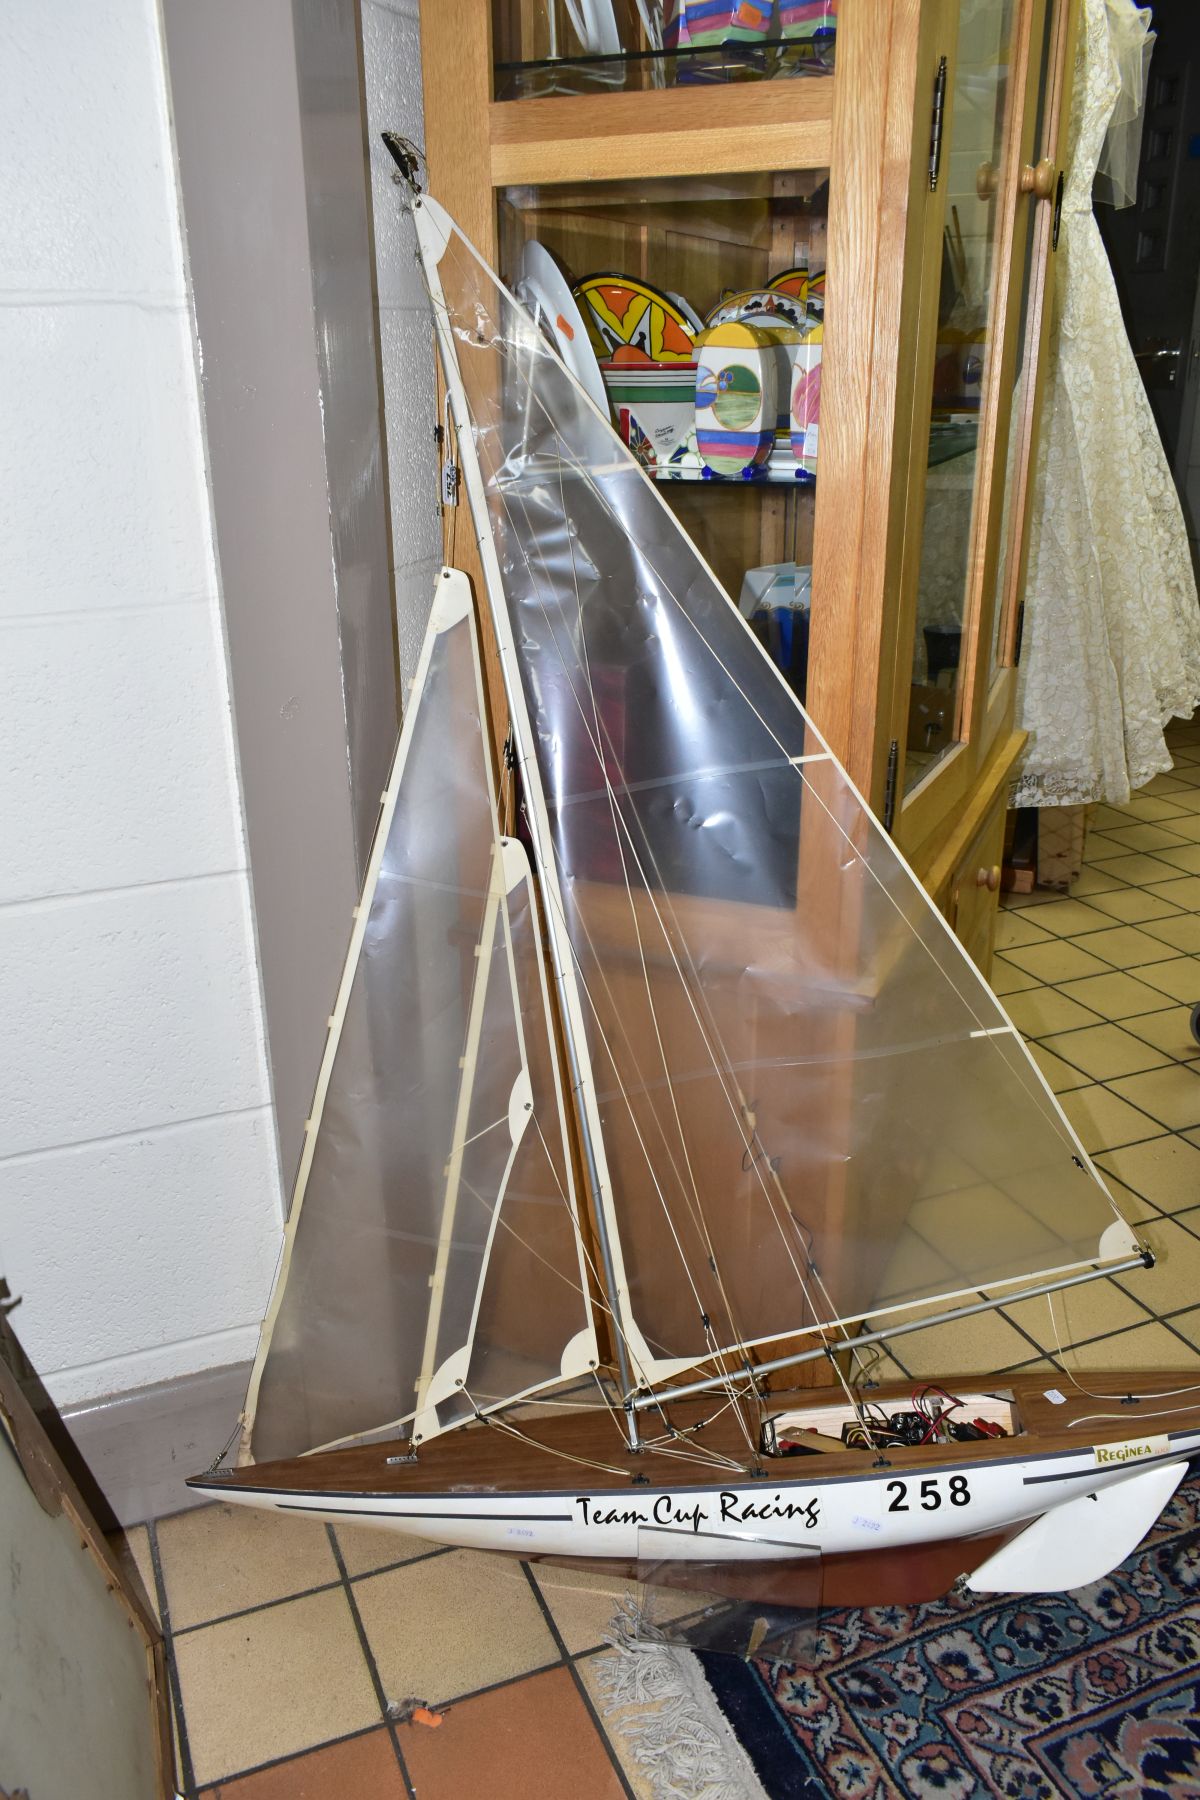 A SCRATCH BUILT MODEL YACHT, at full sail, the deck with rigging and clear sails, motor in hull, - Image 2 of 8